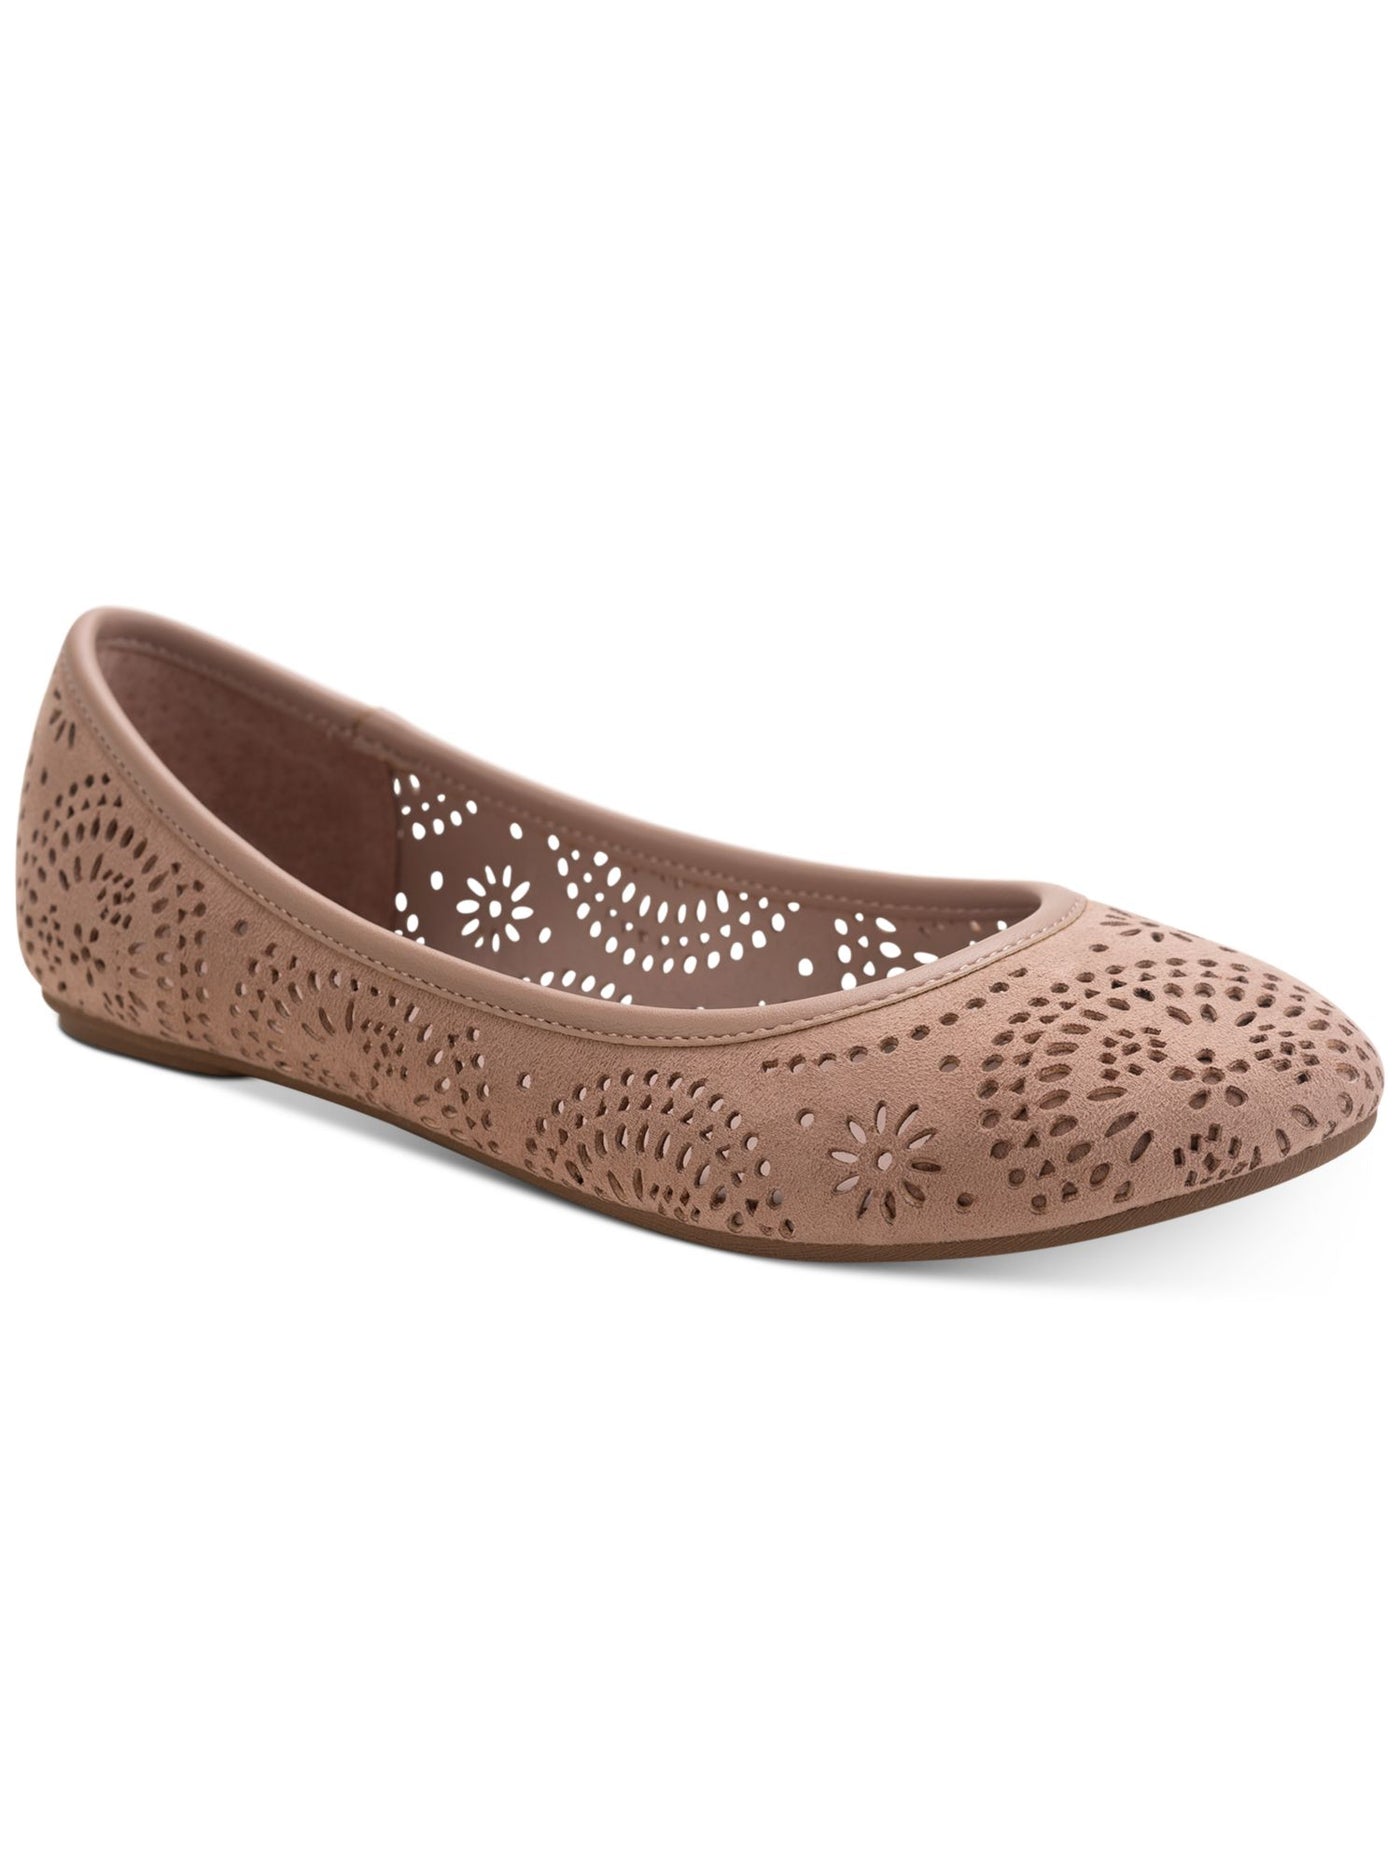 SUN STONE Womens Pink Breathable Comfort Cushioned Perforated Sophia Round Toe Slip On Flats Shoes 8.5 M